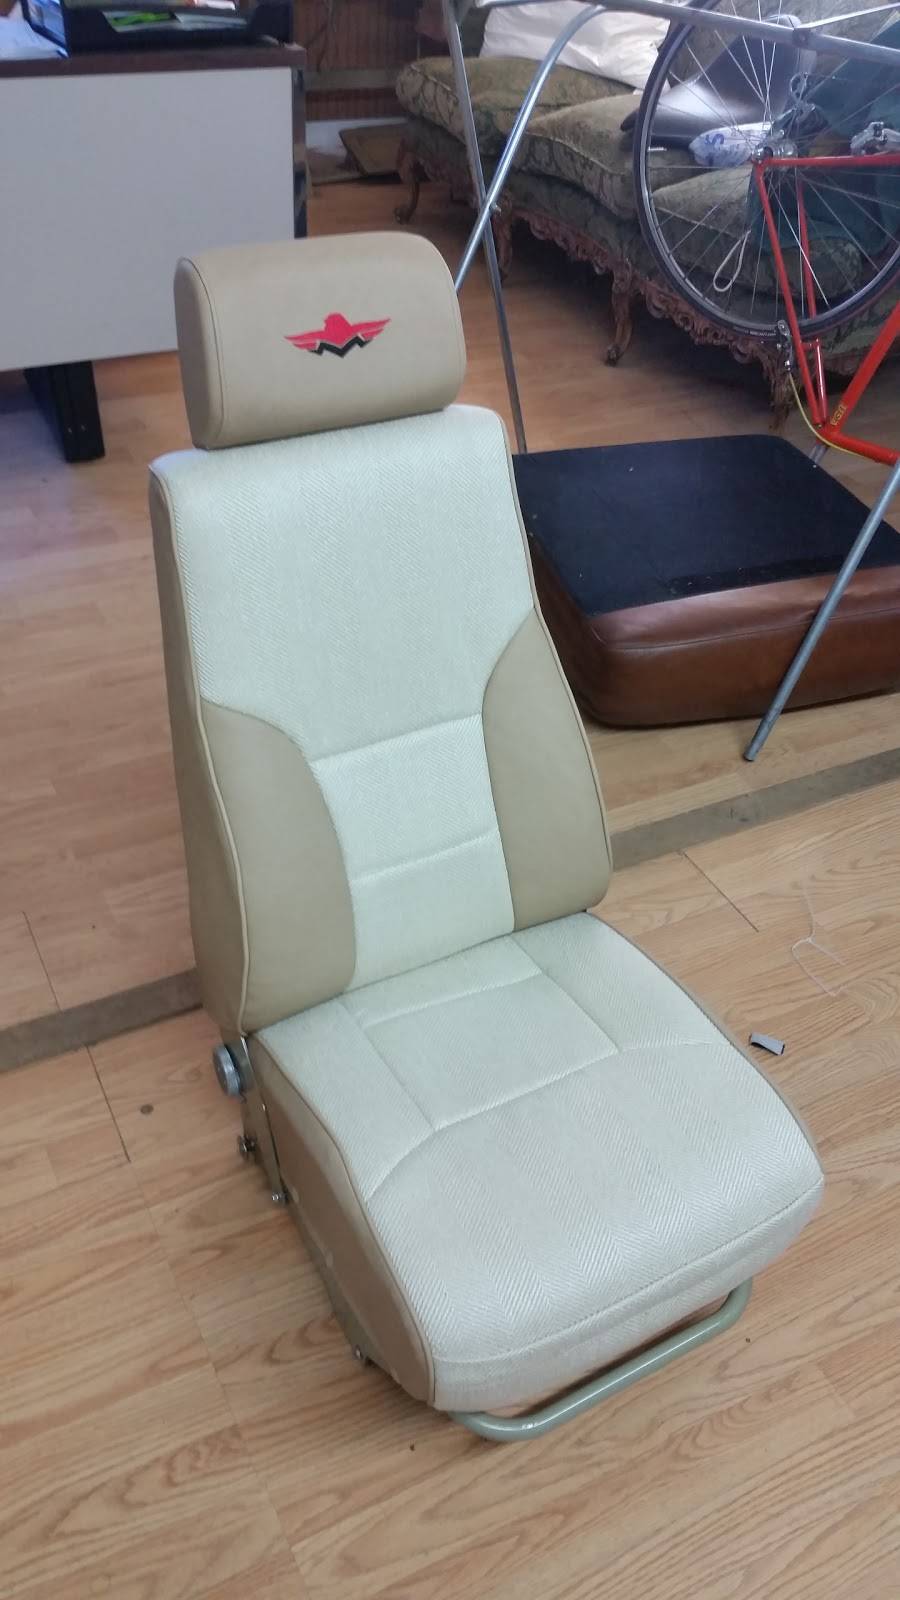 Express Upholstery | 755 Louise St, Reno, NV 89502 | Phone: (775) 324-0614